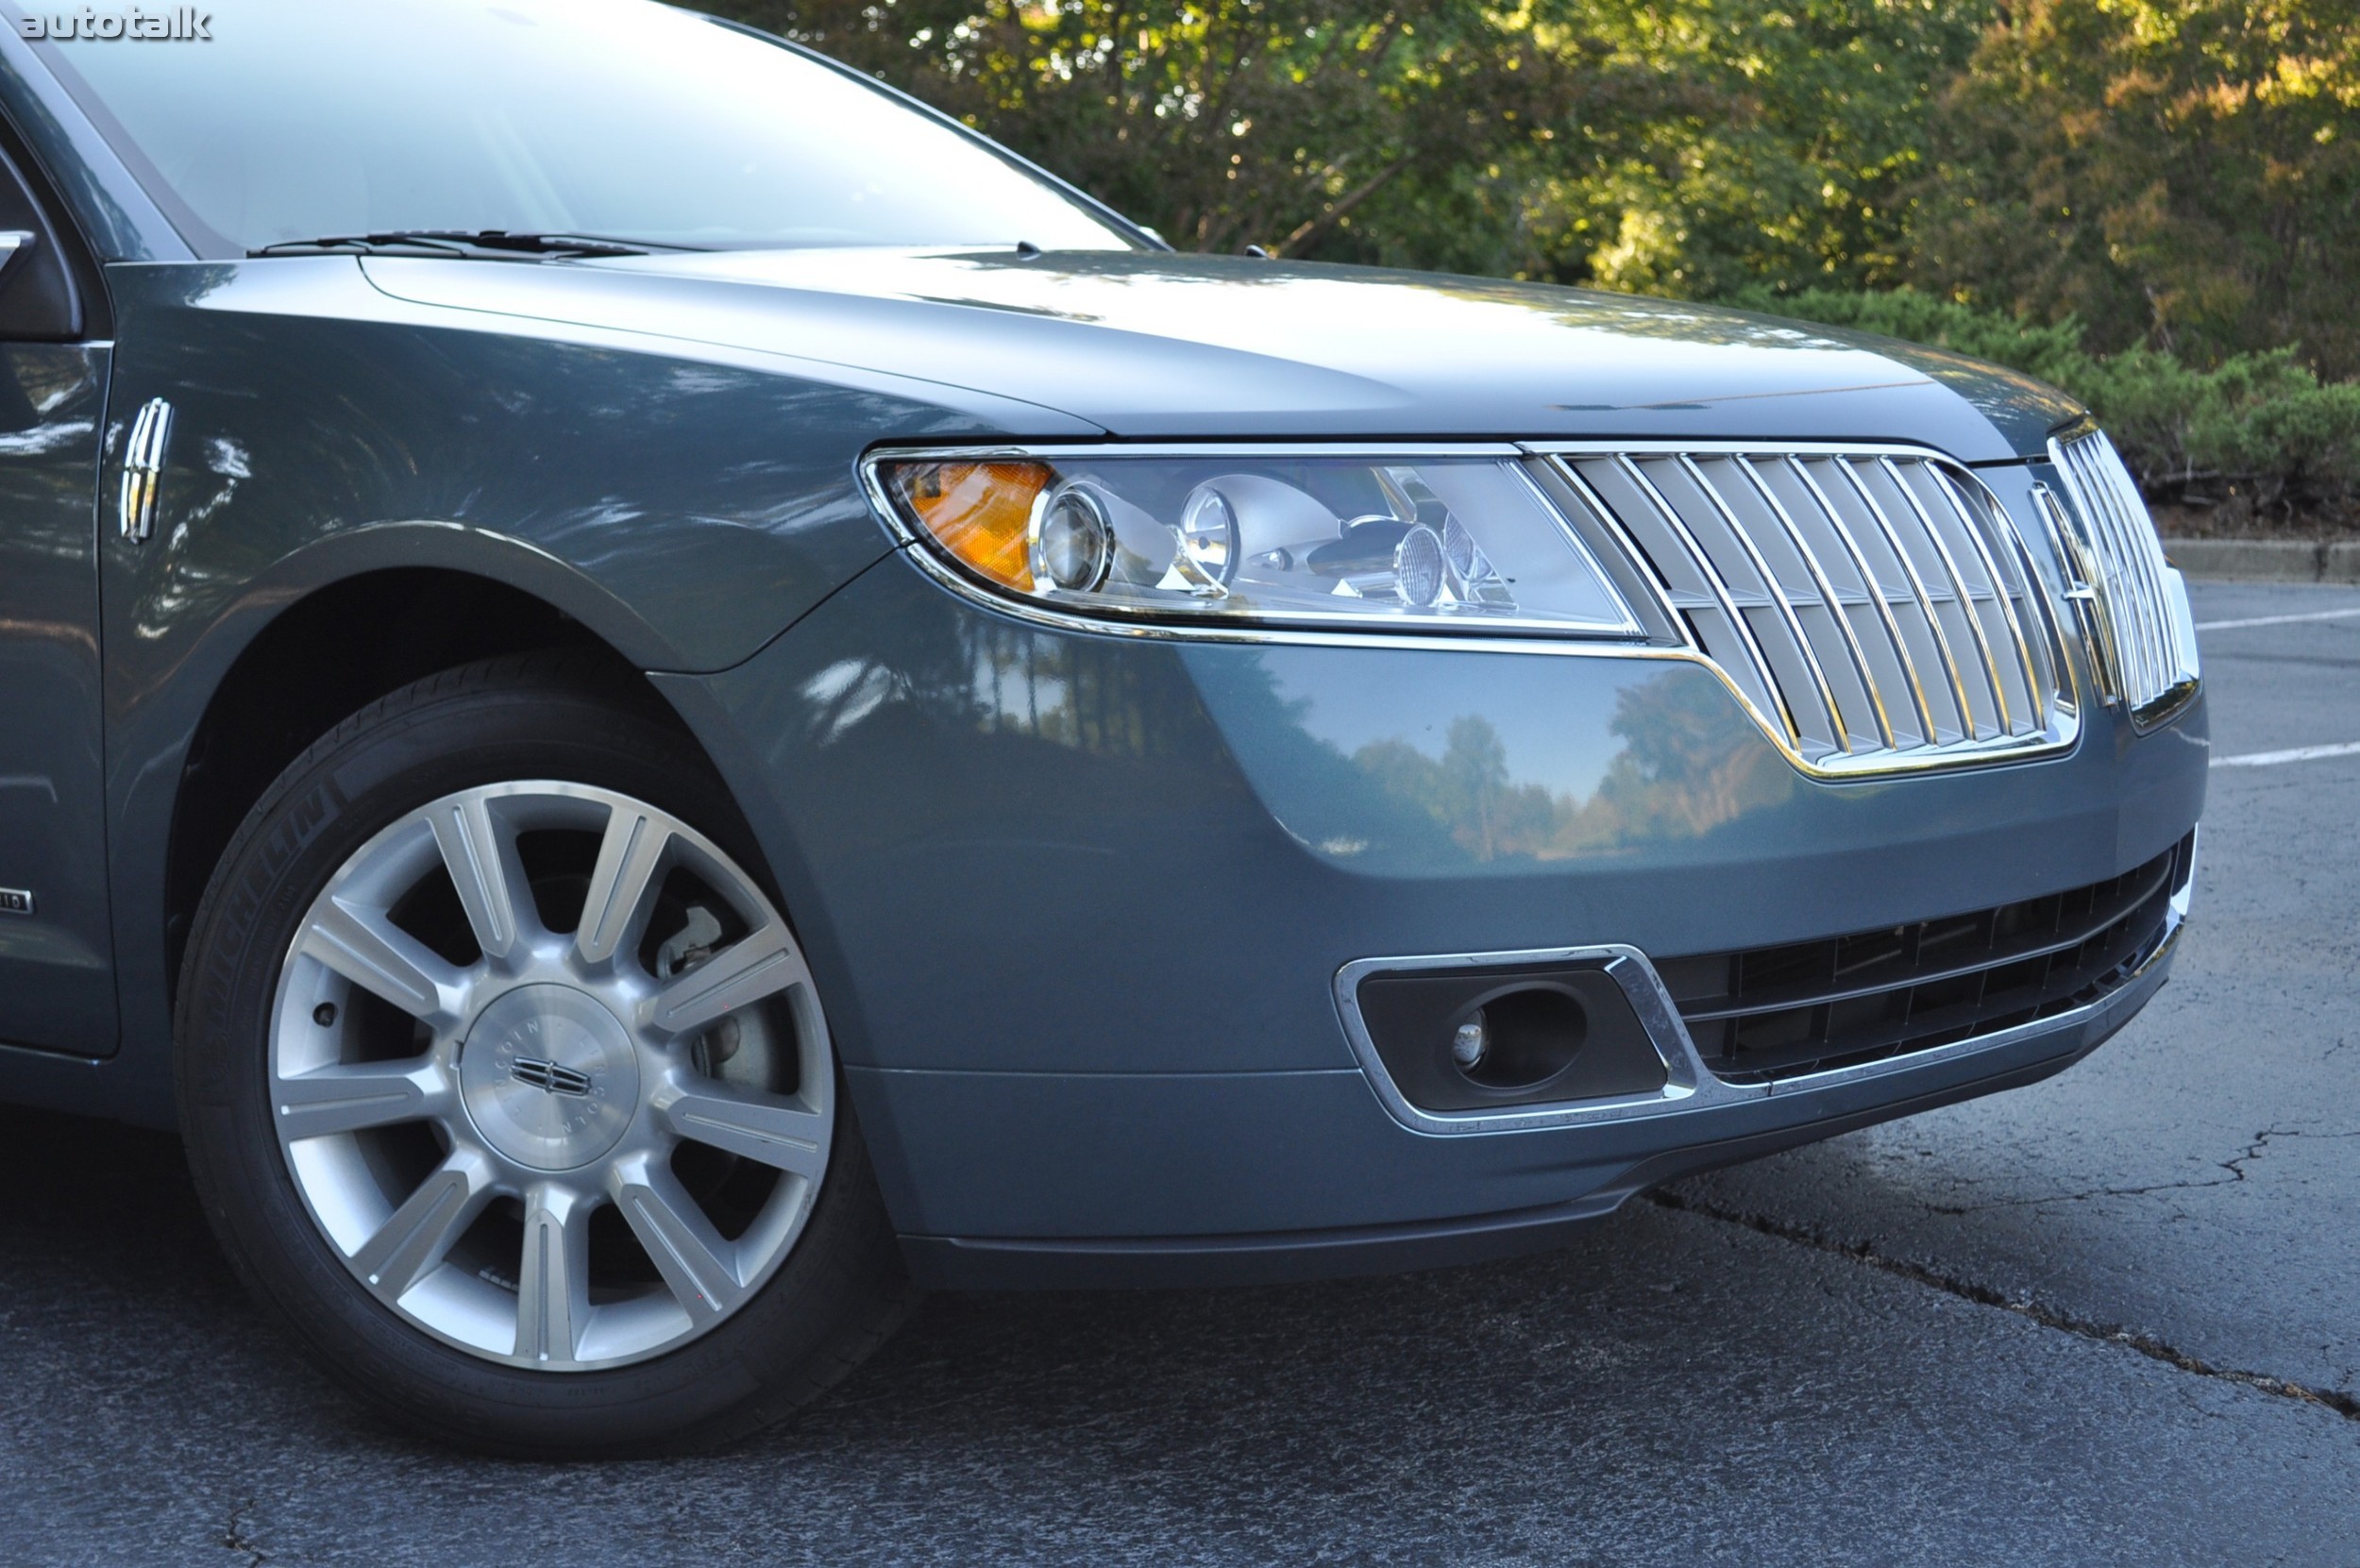 2011 Lincoln MKZ Hybrid Review